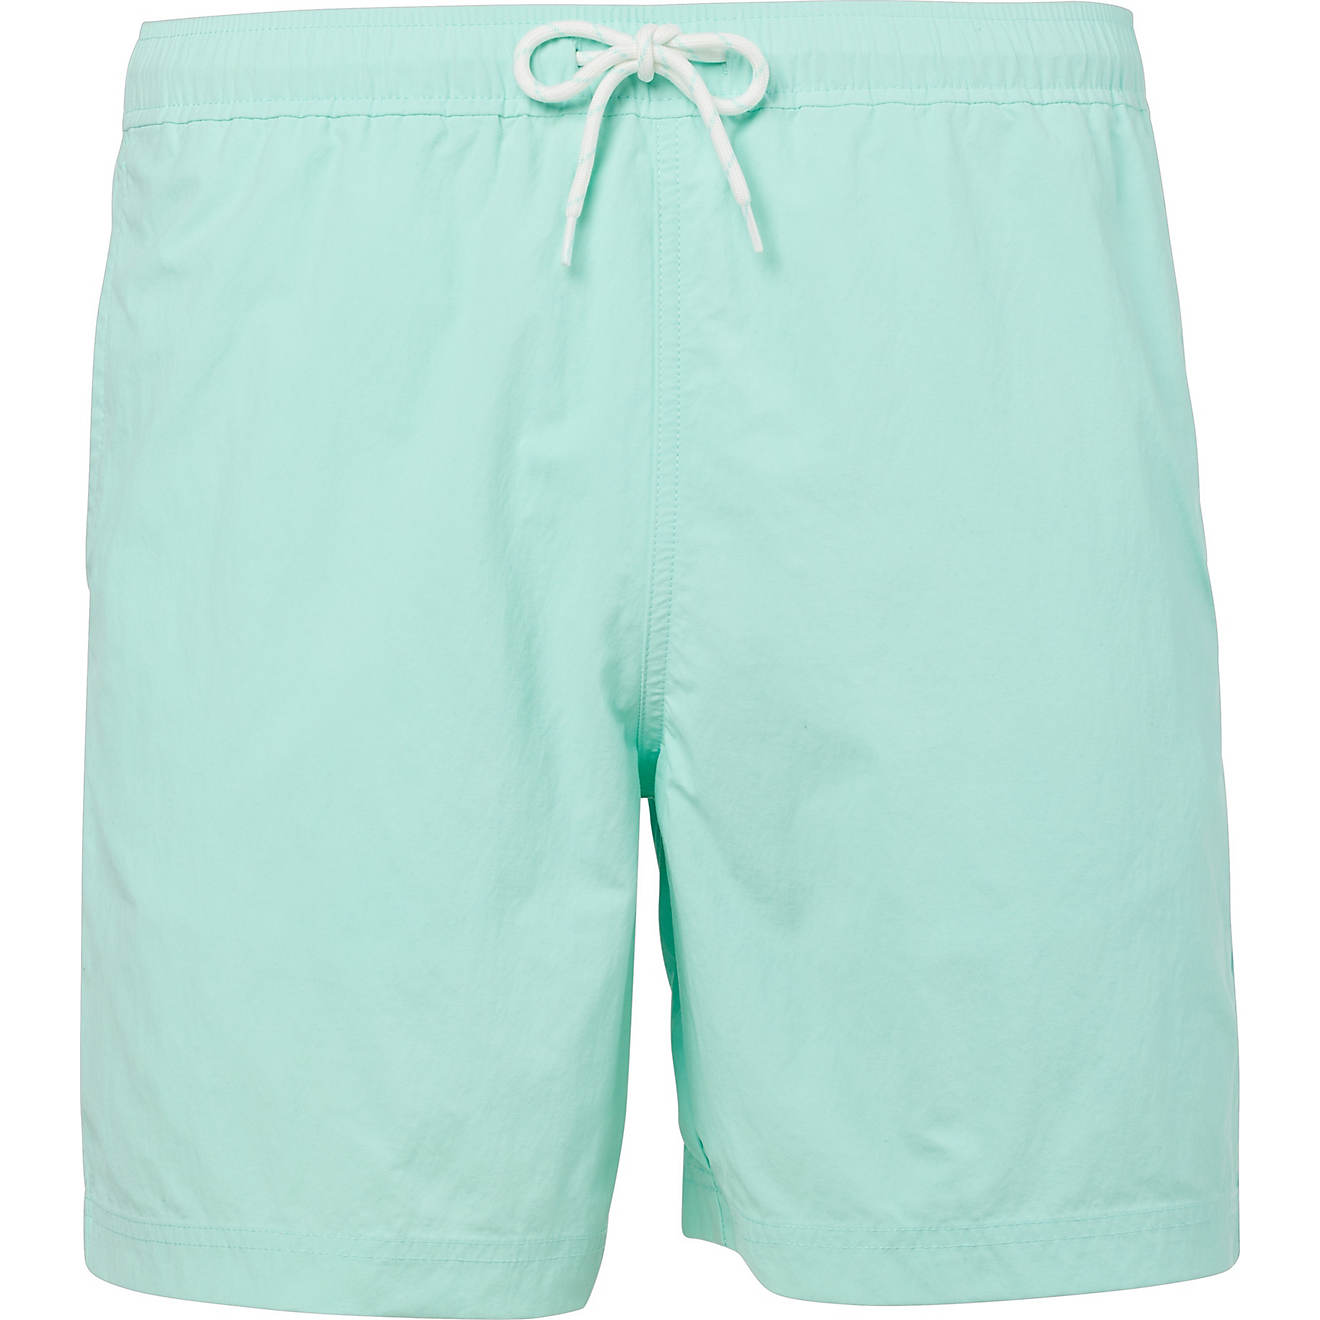 Magellan Outdoors Men's Shore & Line Solid Shorts 7 in                                                                           - view number 1